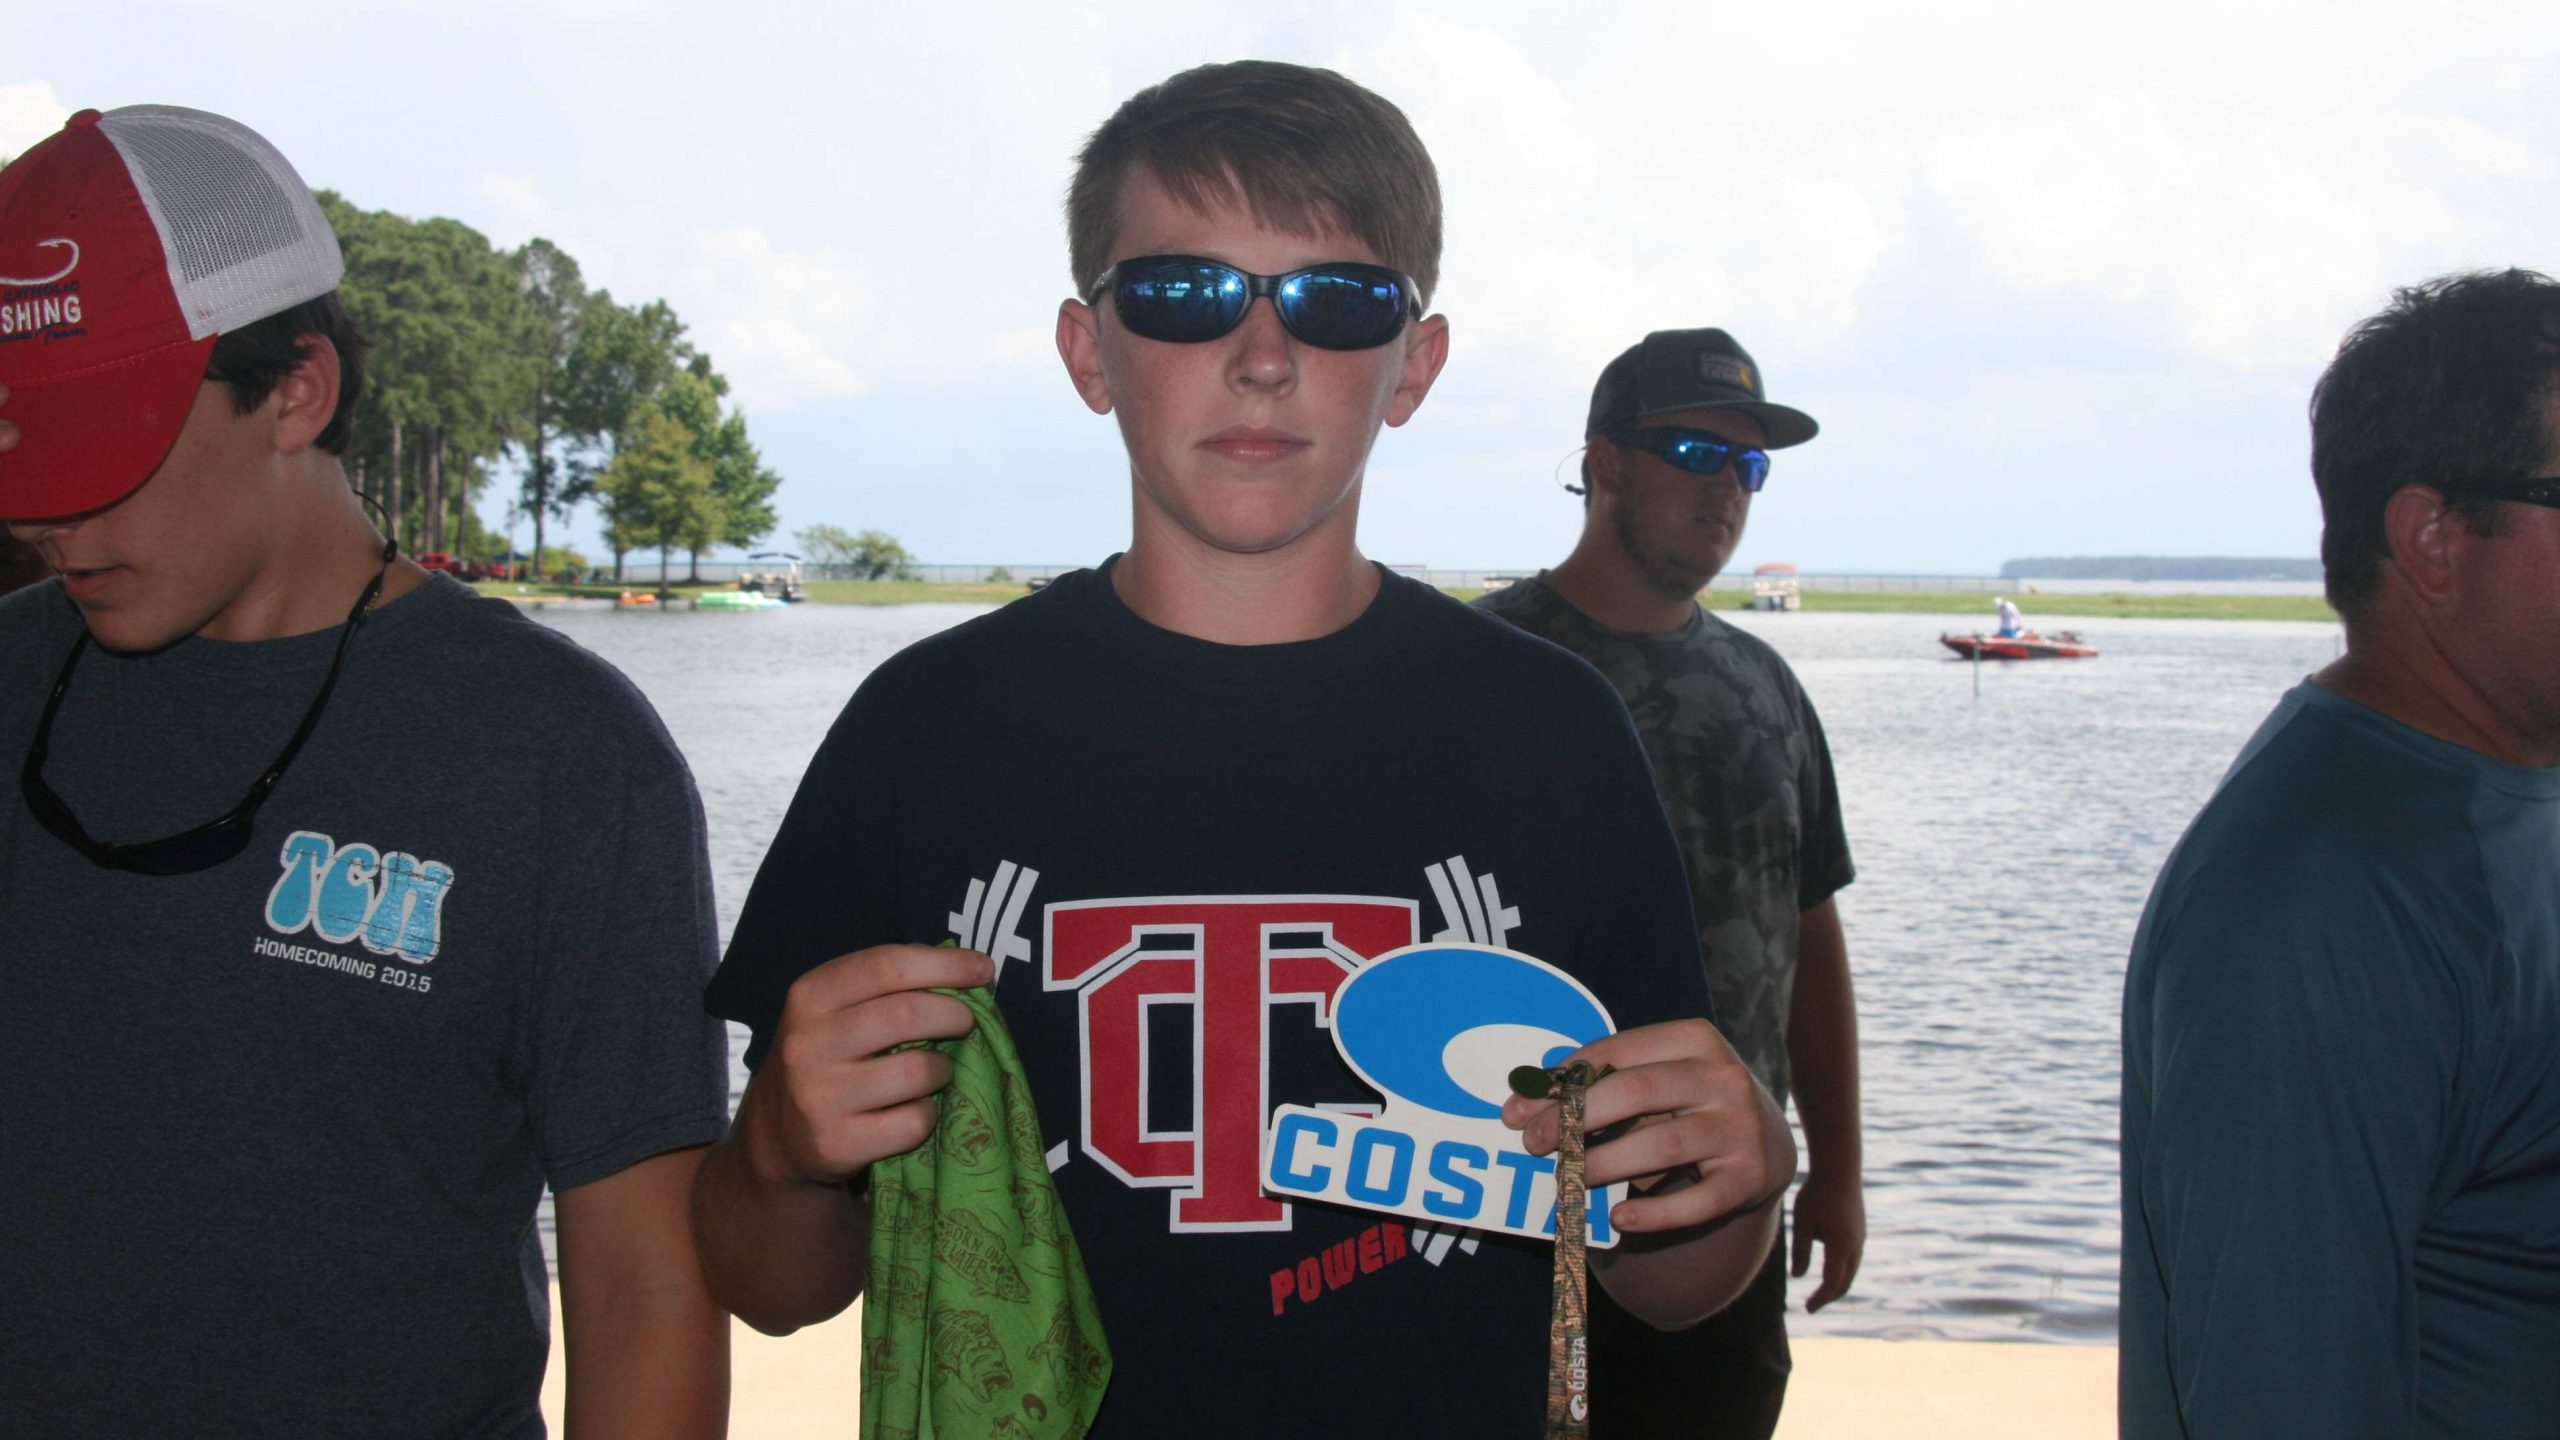 Lane Lutchworth of Teurlings Catholic High School in Lafayette, Louisiana shows off some cool Costa gear he picked up during registration.